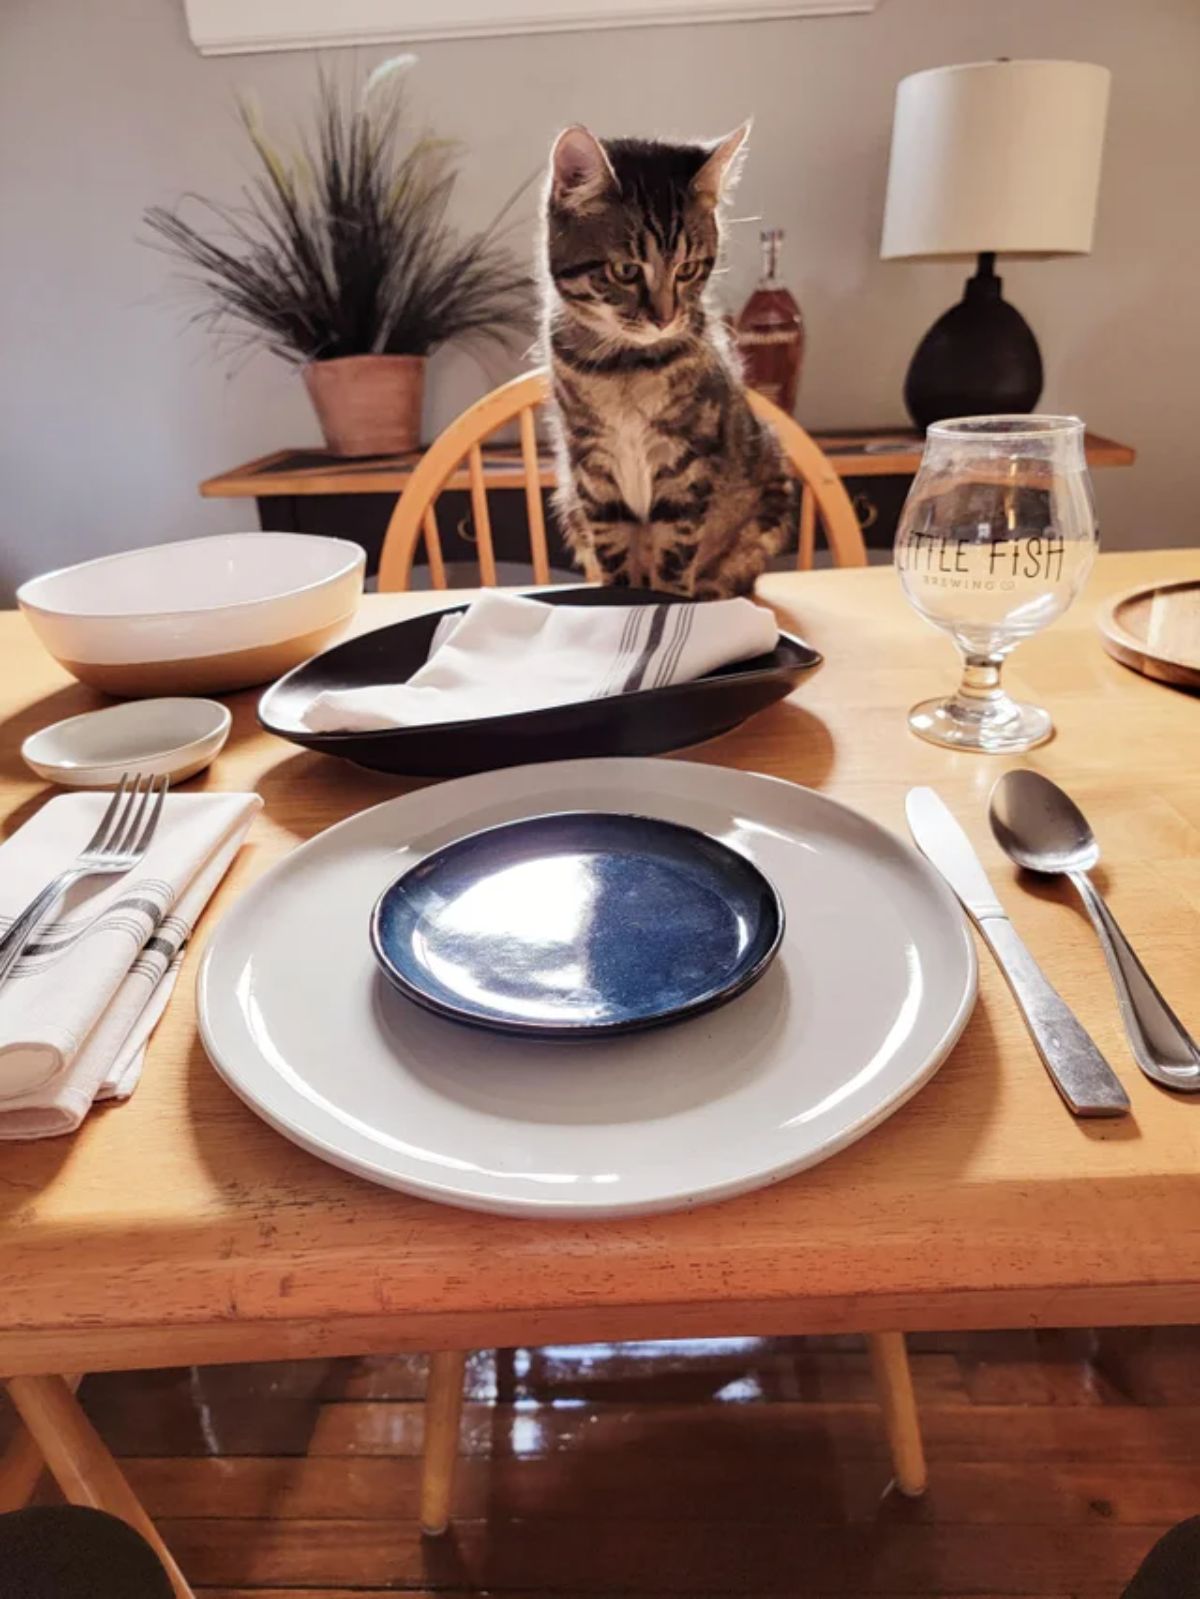 brown tabby kitten sitting on a table set for a meal